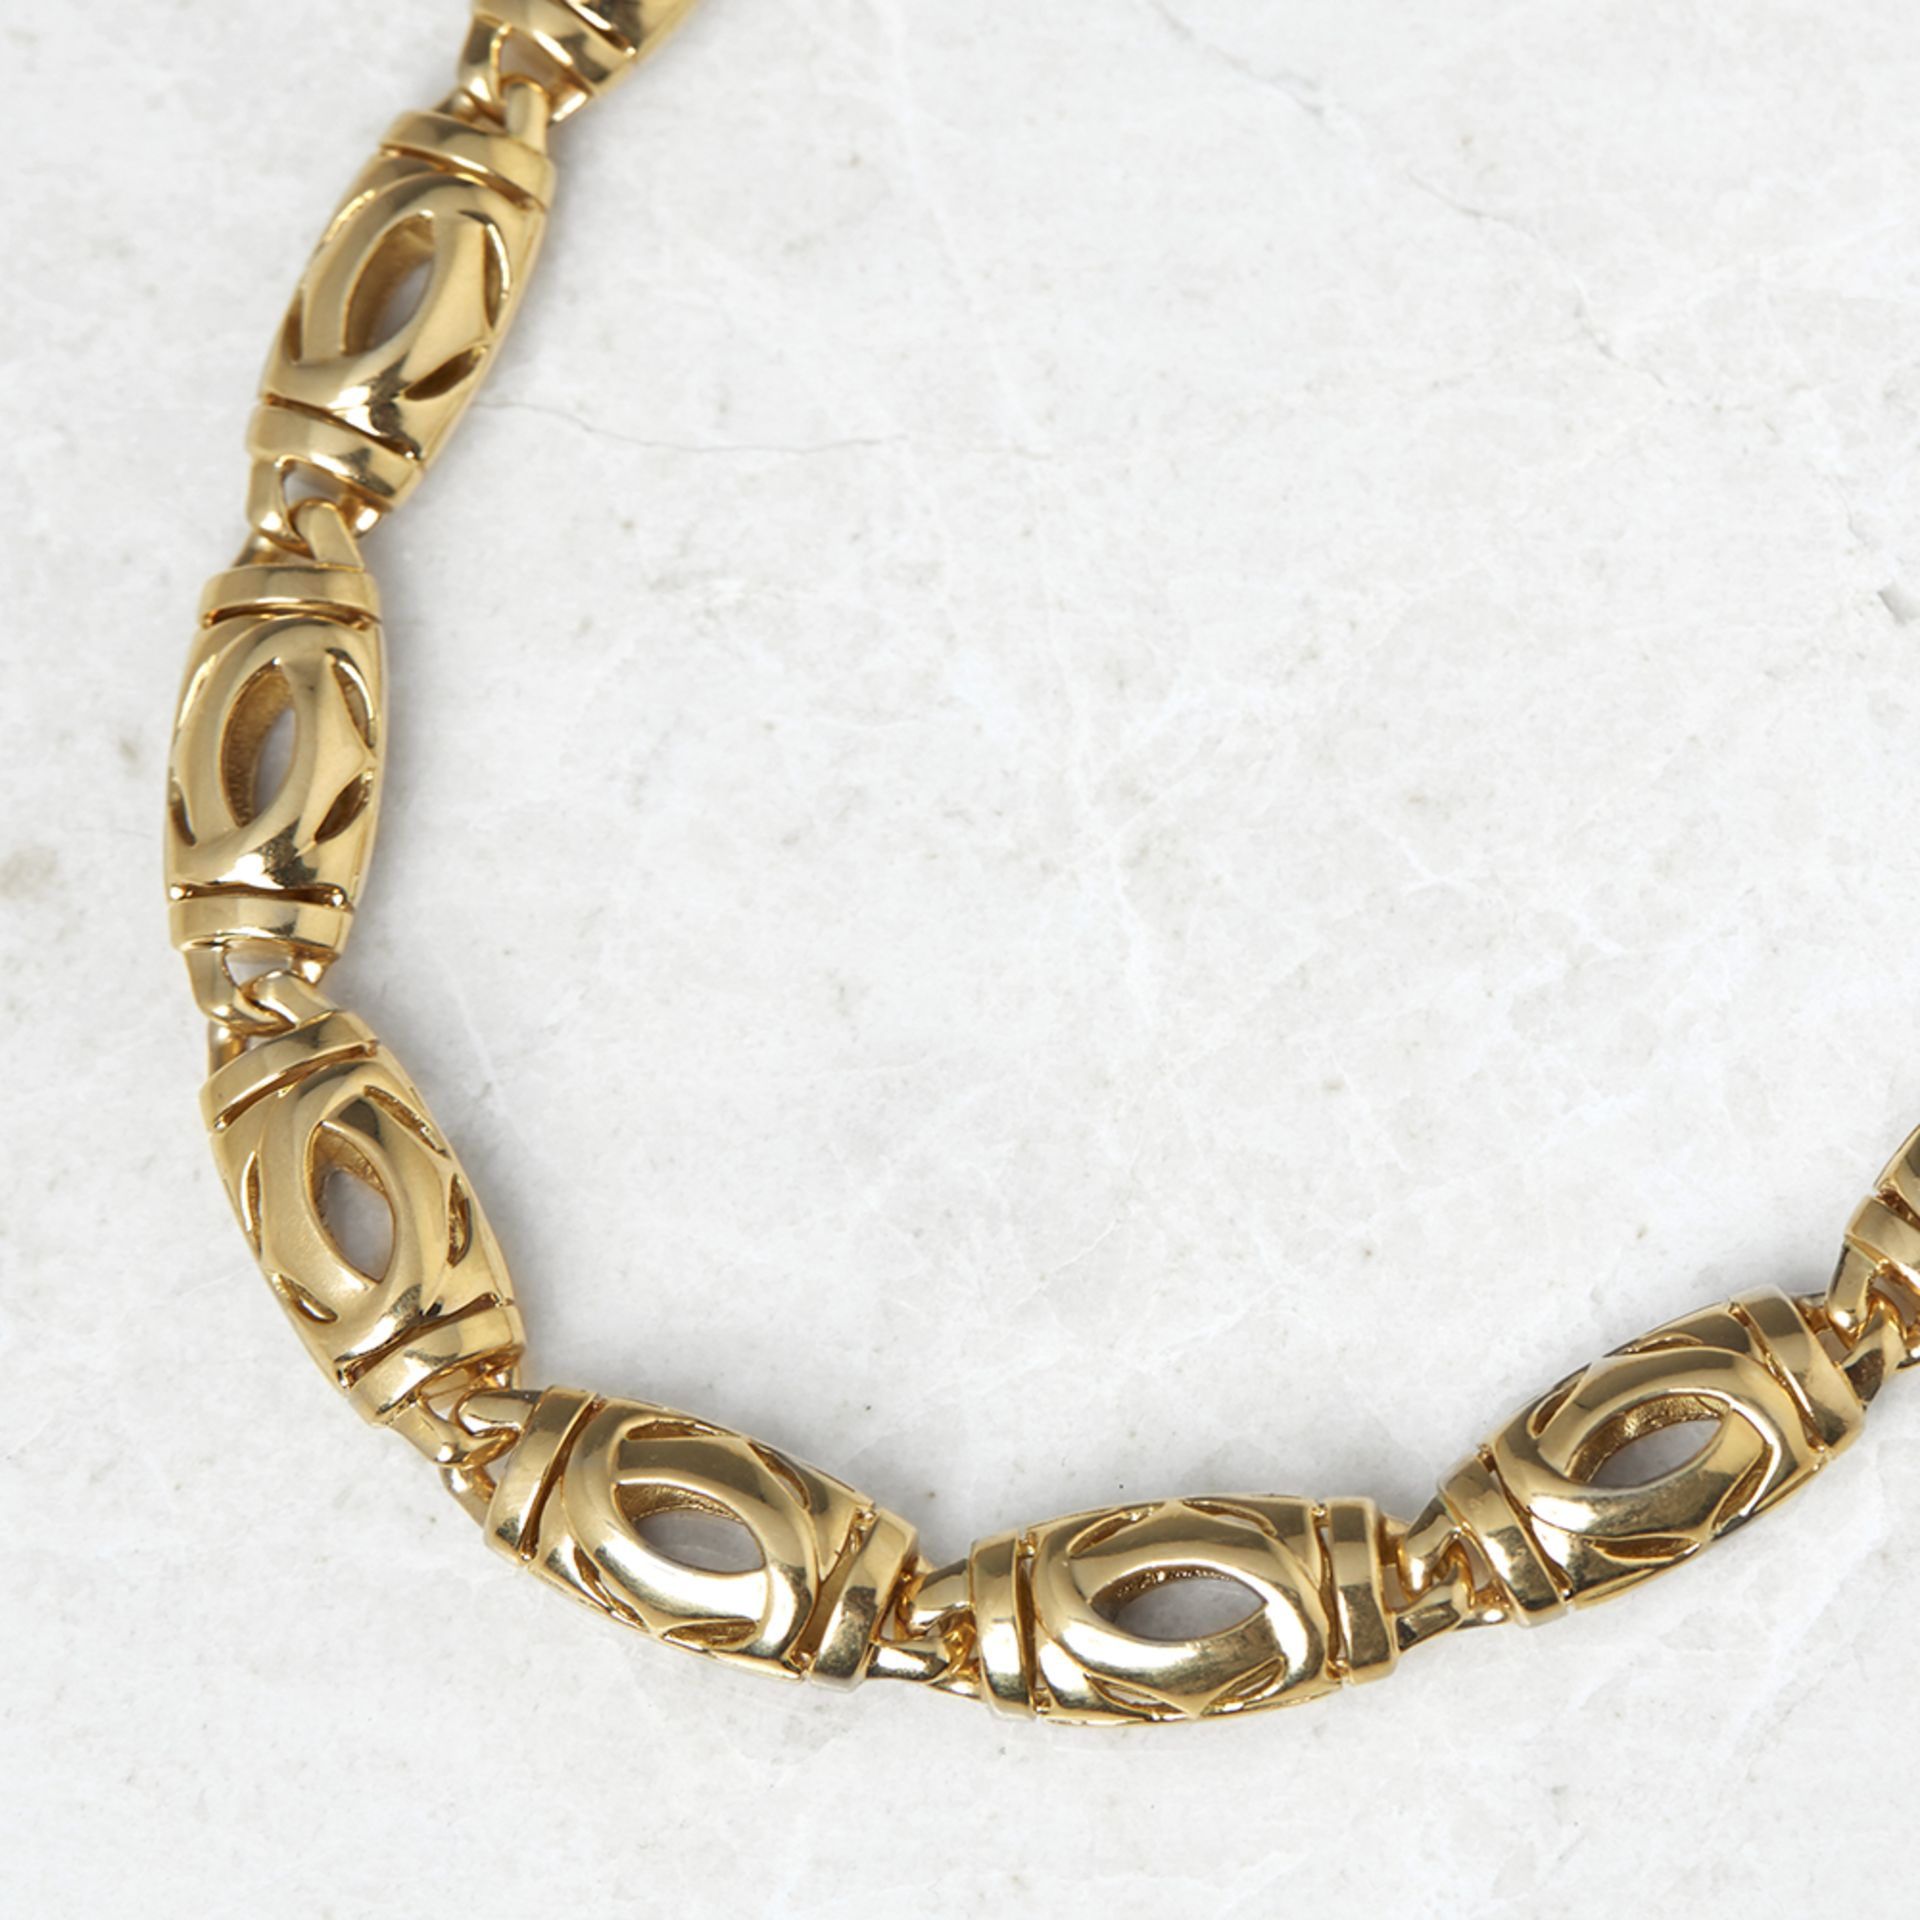 Cartier 18k Yellow Gold Double C Design Necklace - Image 2 of 8